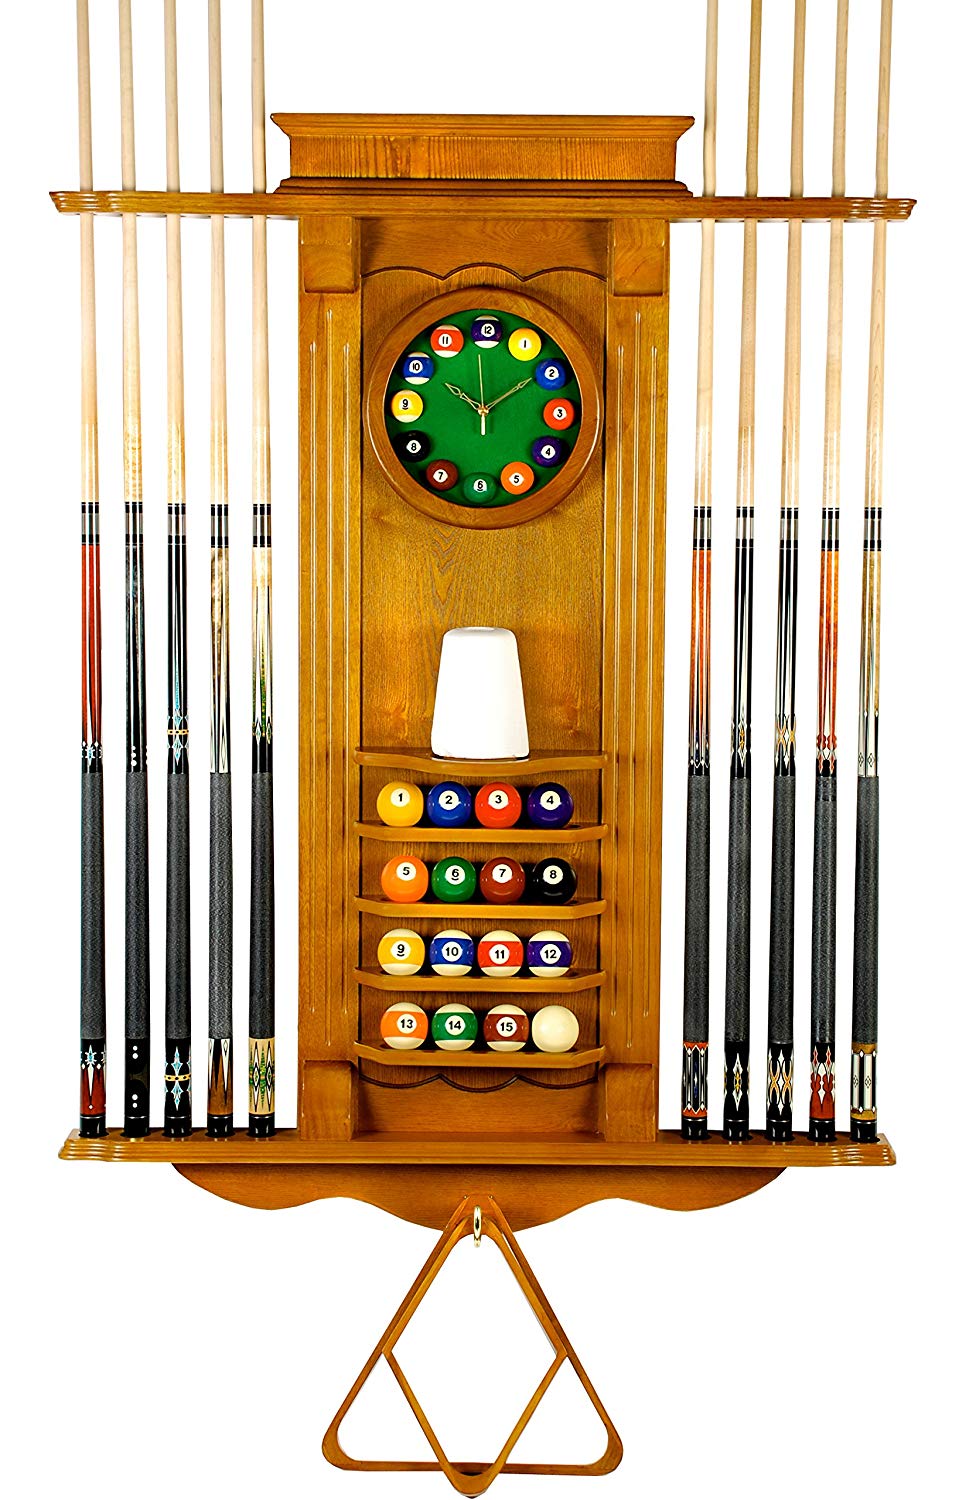 Iszy 10 Pool Cue Rack with Clock